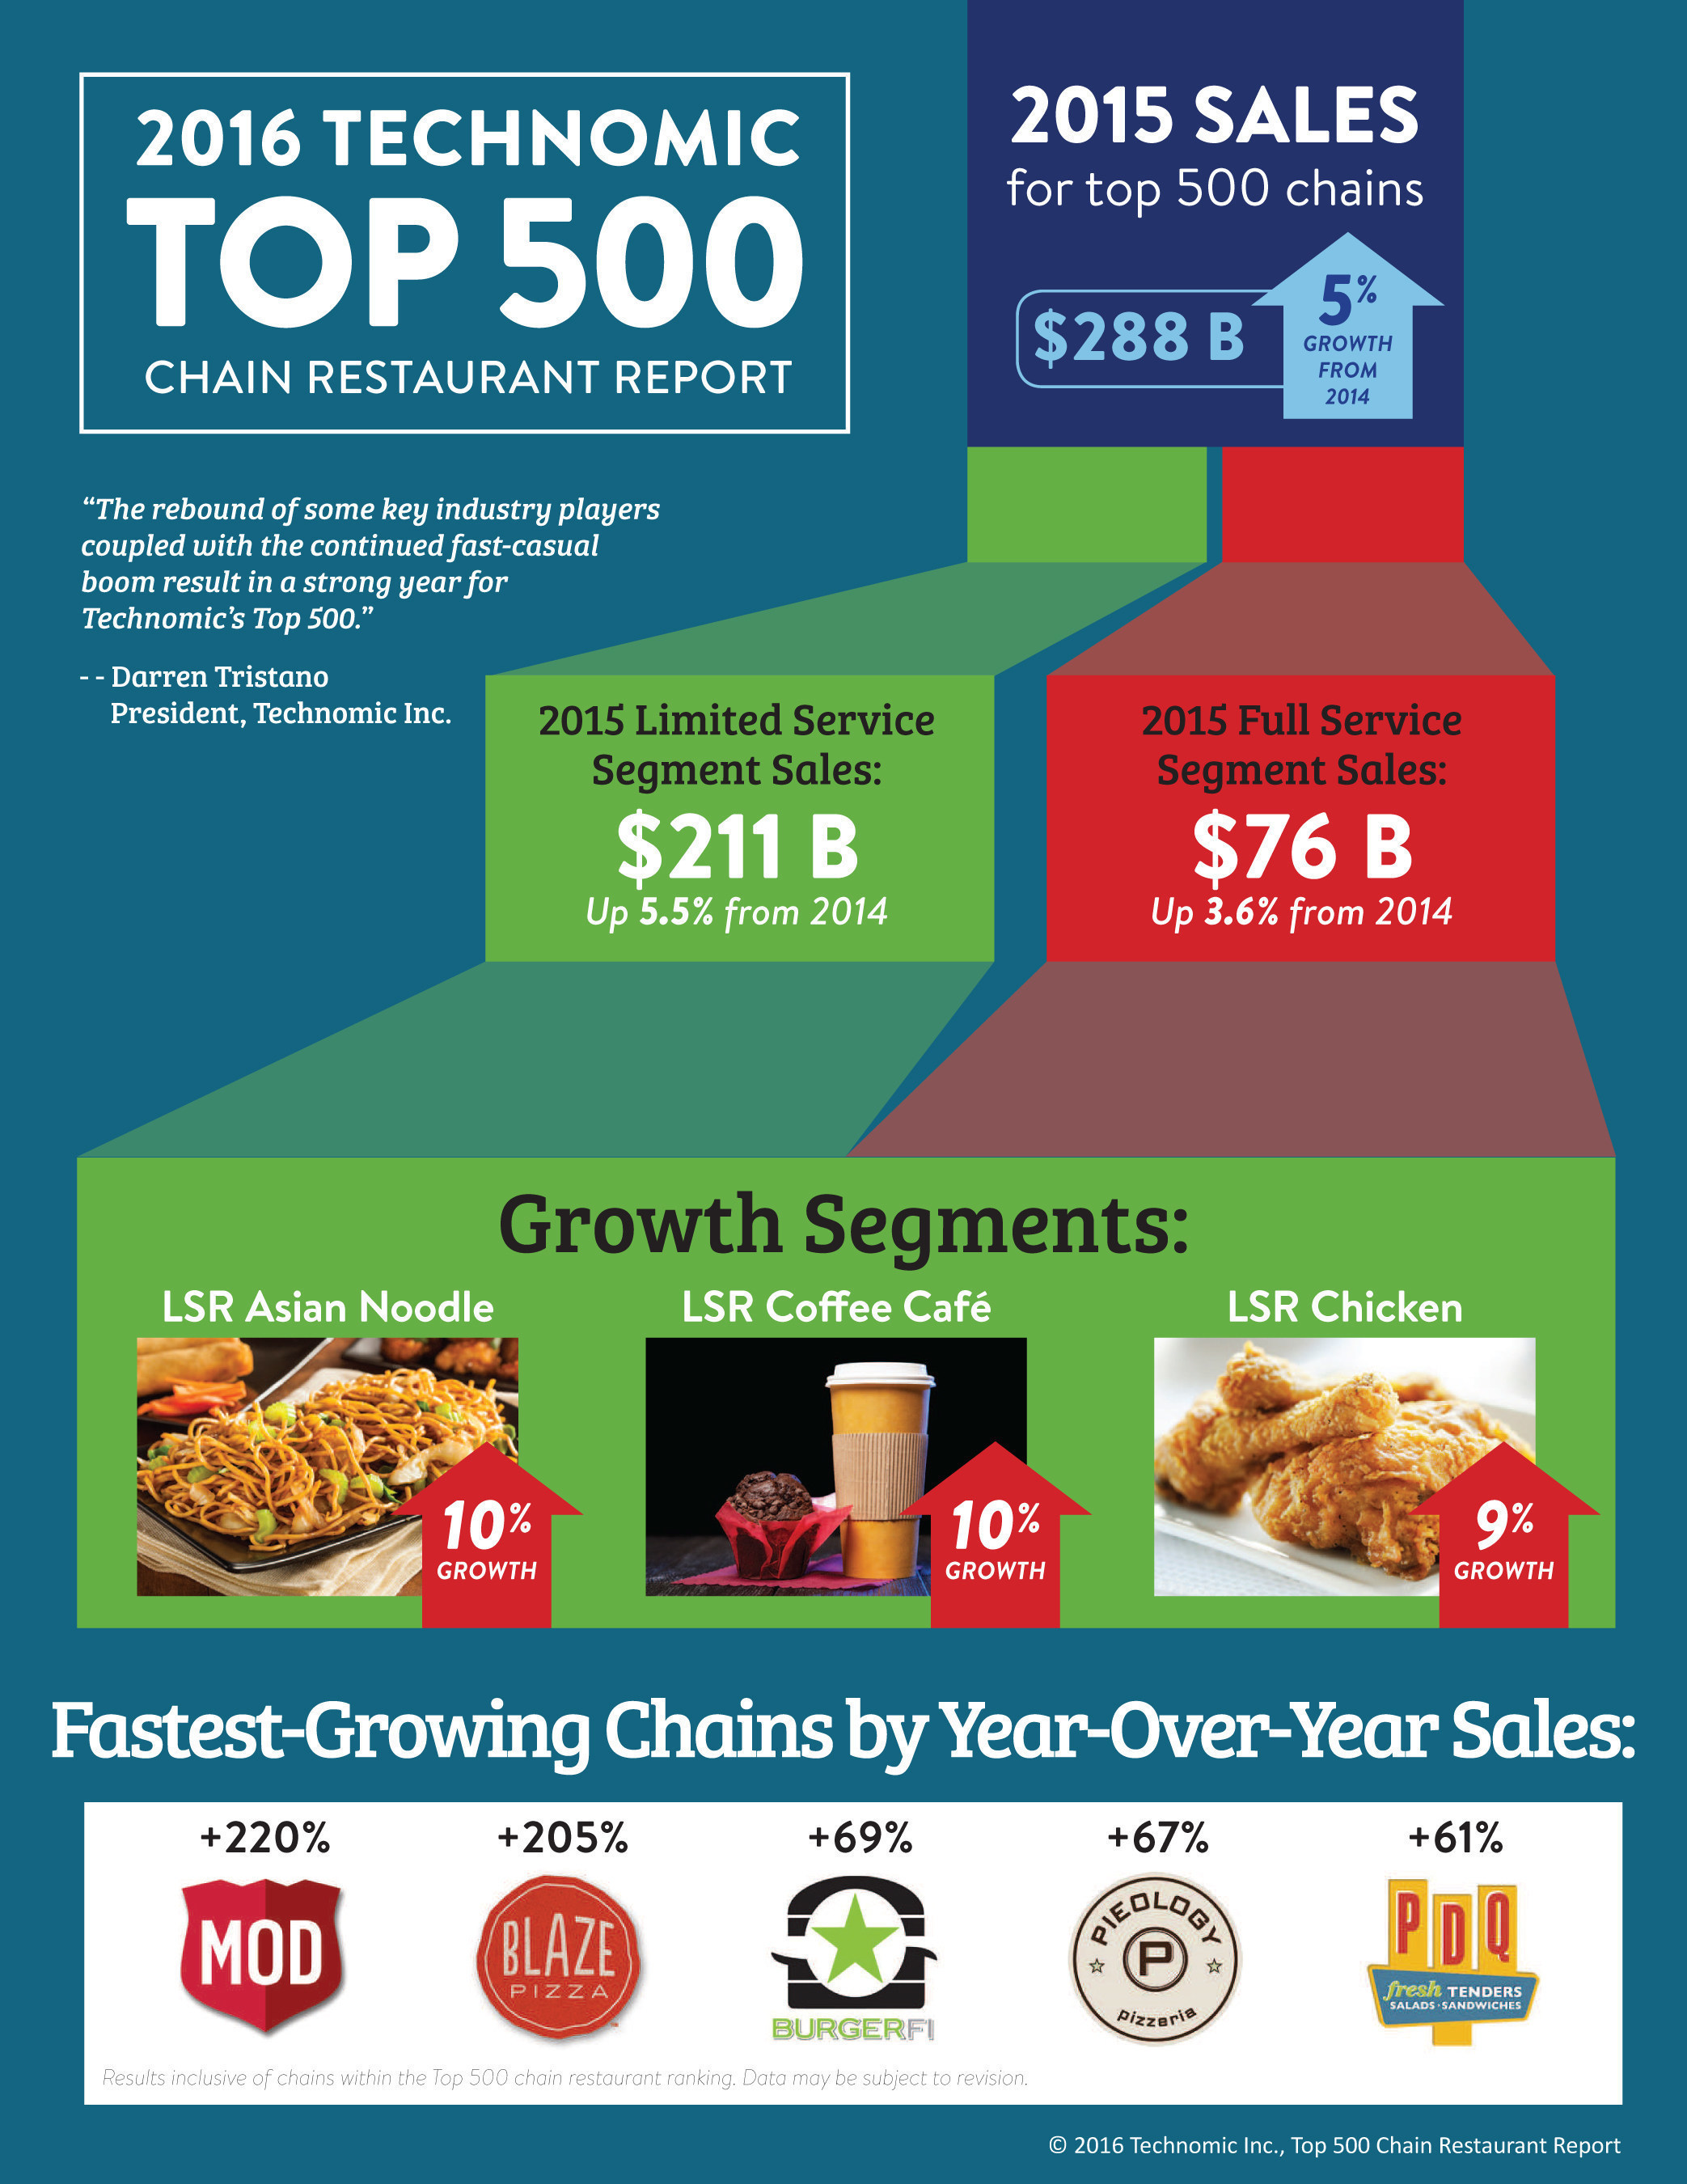 This year's Top 500 Chain Restaurant Report from Technomic has a clear message: Limited-service chains are in the driver's seat.